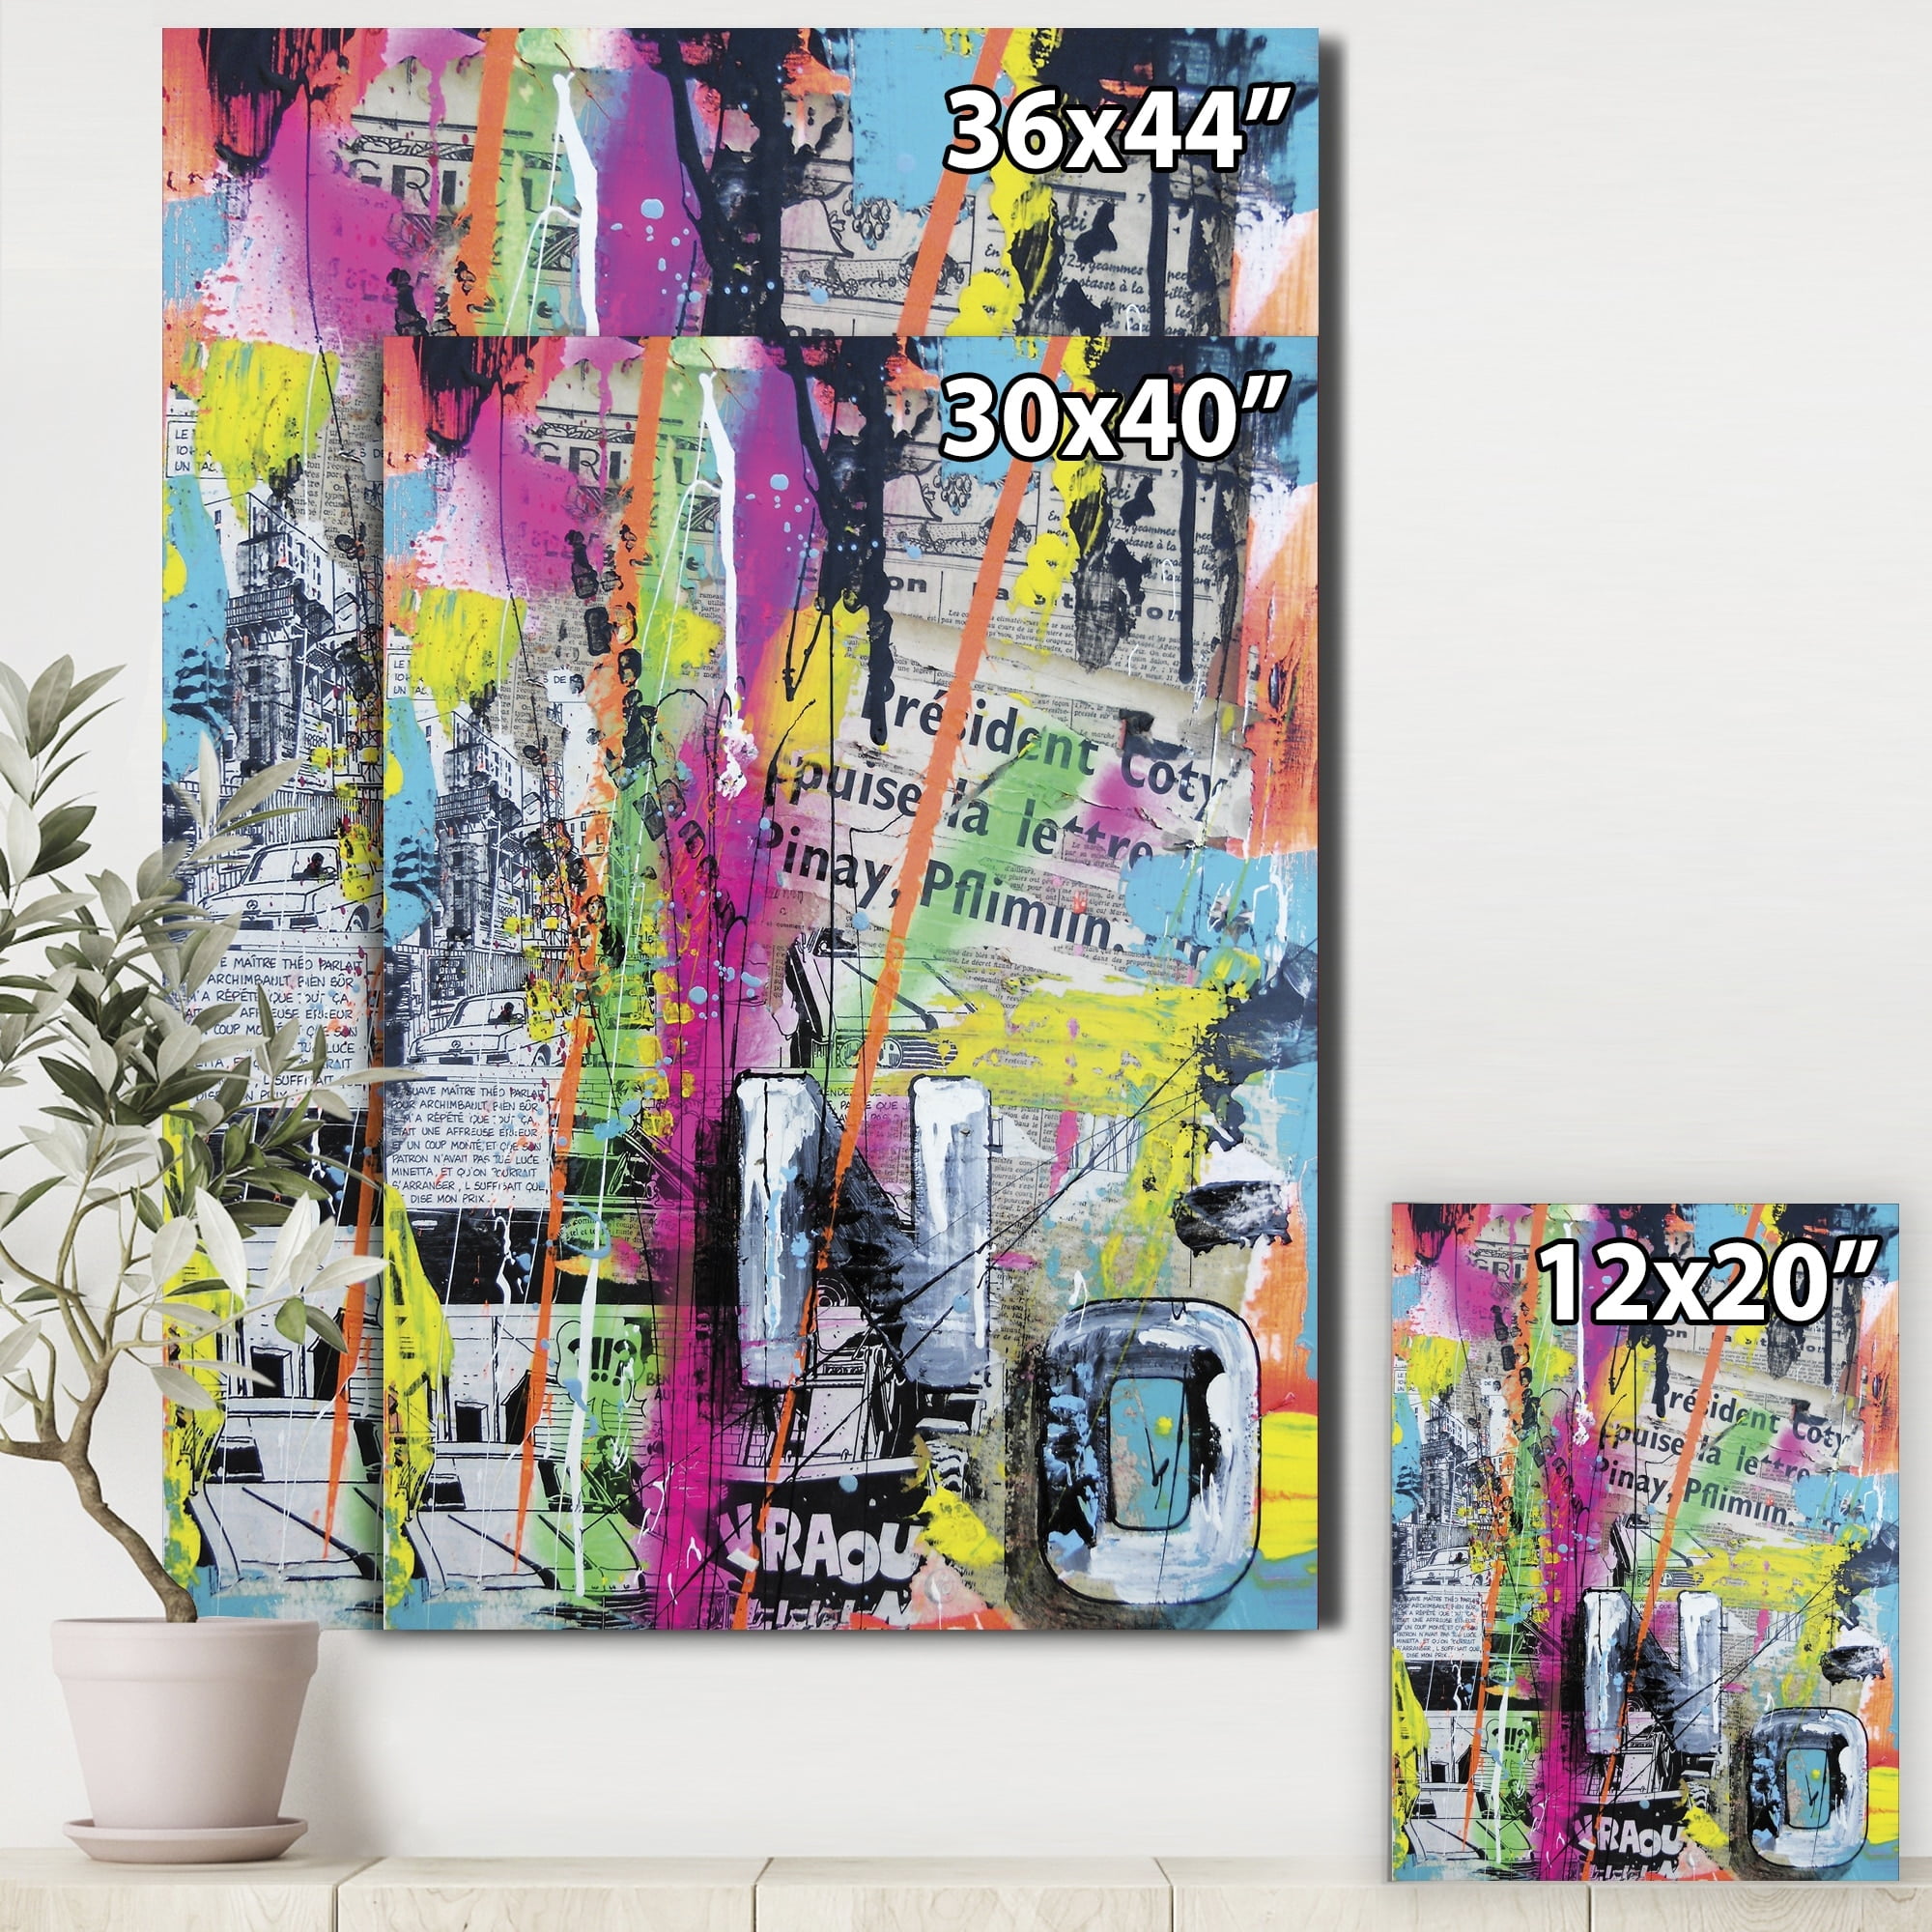 Designart 'Old Style Newspaper Street Art Collage VIII' Modern Gallery-Wrapped Canvas - 36x28 - 3 Panels - 36 in. Wide x 28 in. High - 3 Panels